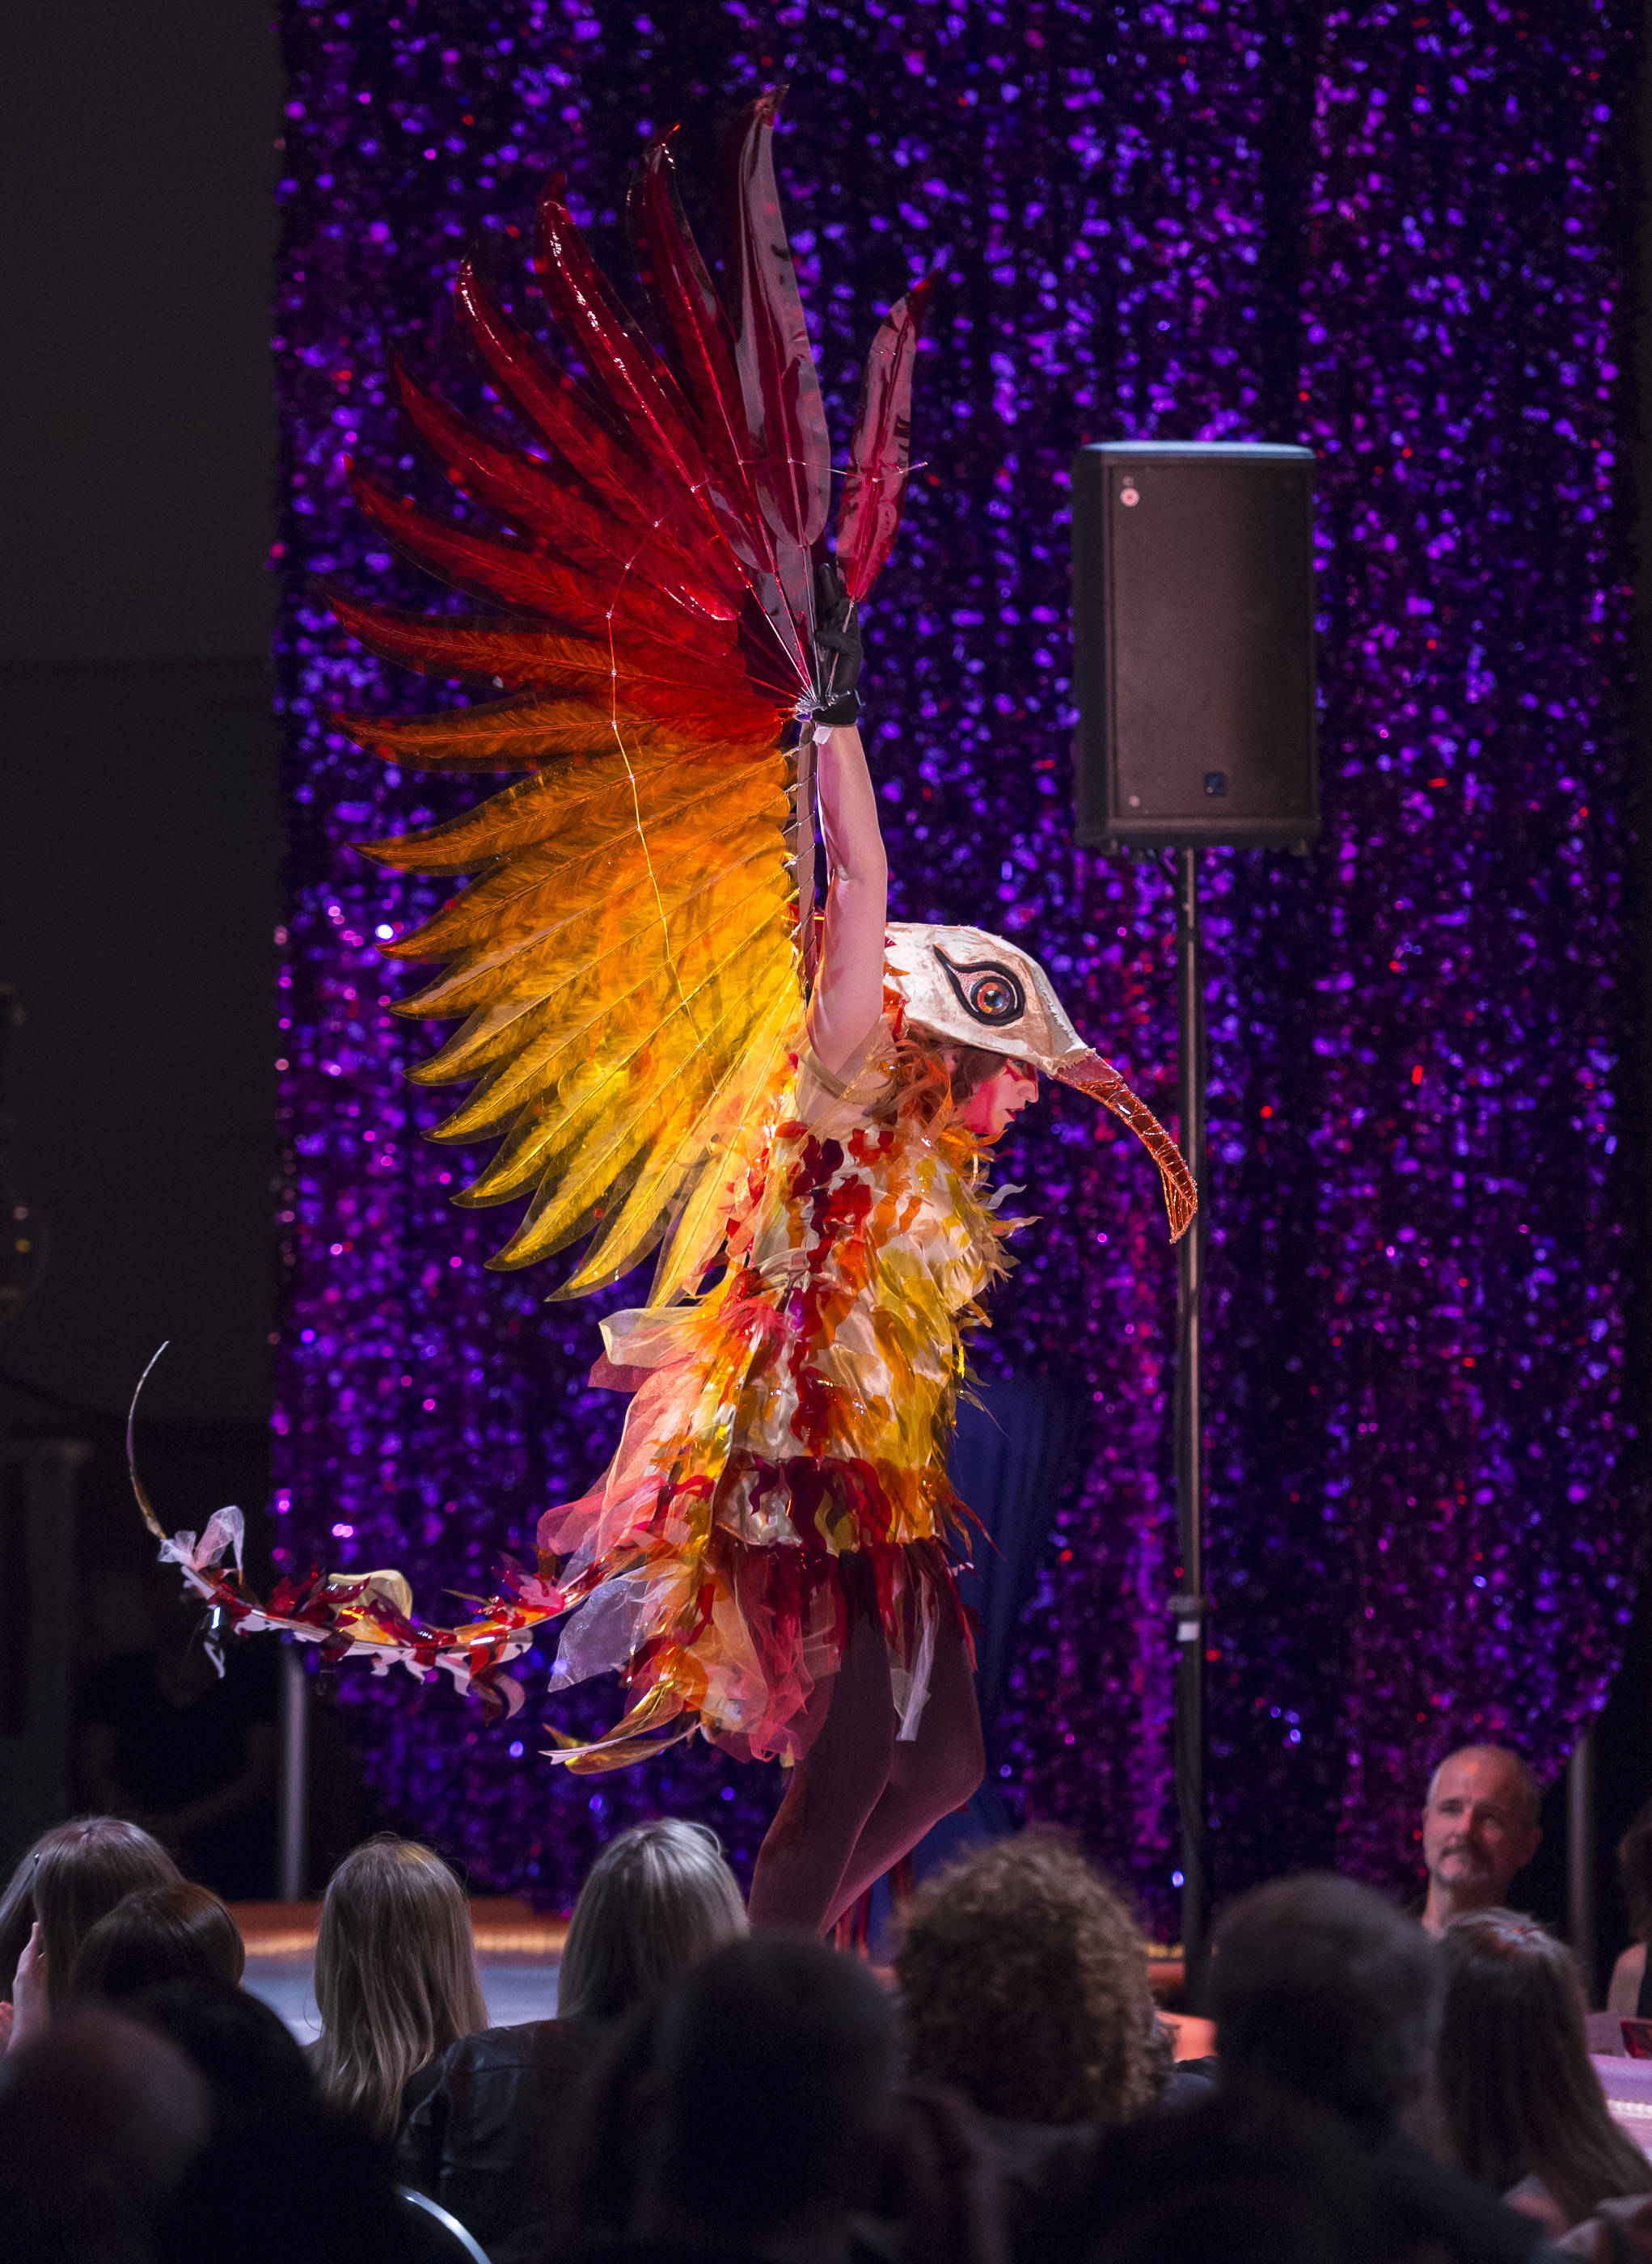 “Phlight of the Phoenix” by Kathleen Harper and Annie Szeliski, modeled by Stacy Katasse, at the Wearable Art Show at Centennial Hall on Saturday, Feb. 17, 2018. Phlight of Phoenix won the People’s Choice Award. (Michael Penn | Juneau Empire File)